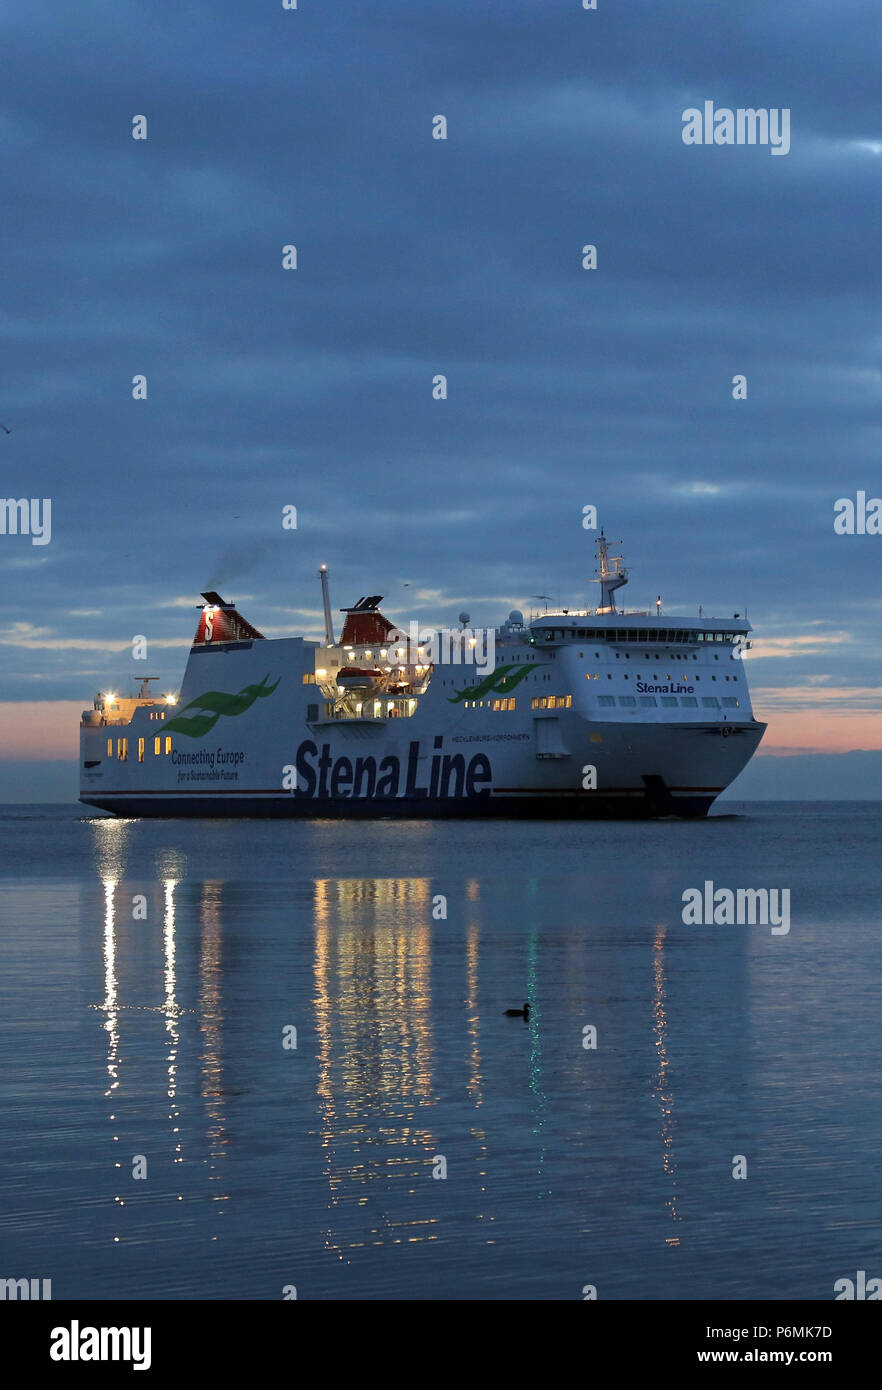 Warnemuende, ferry of the Stena Line on the Baltic Sea Stock Photo